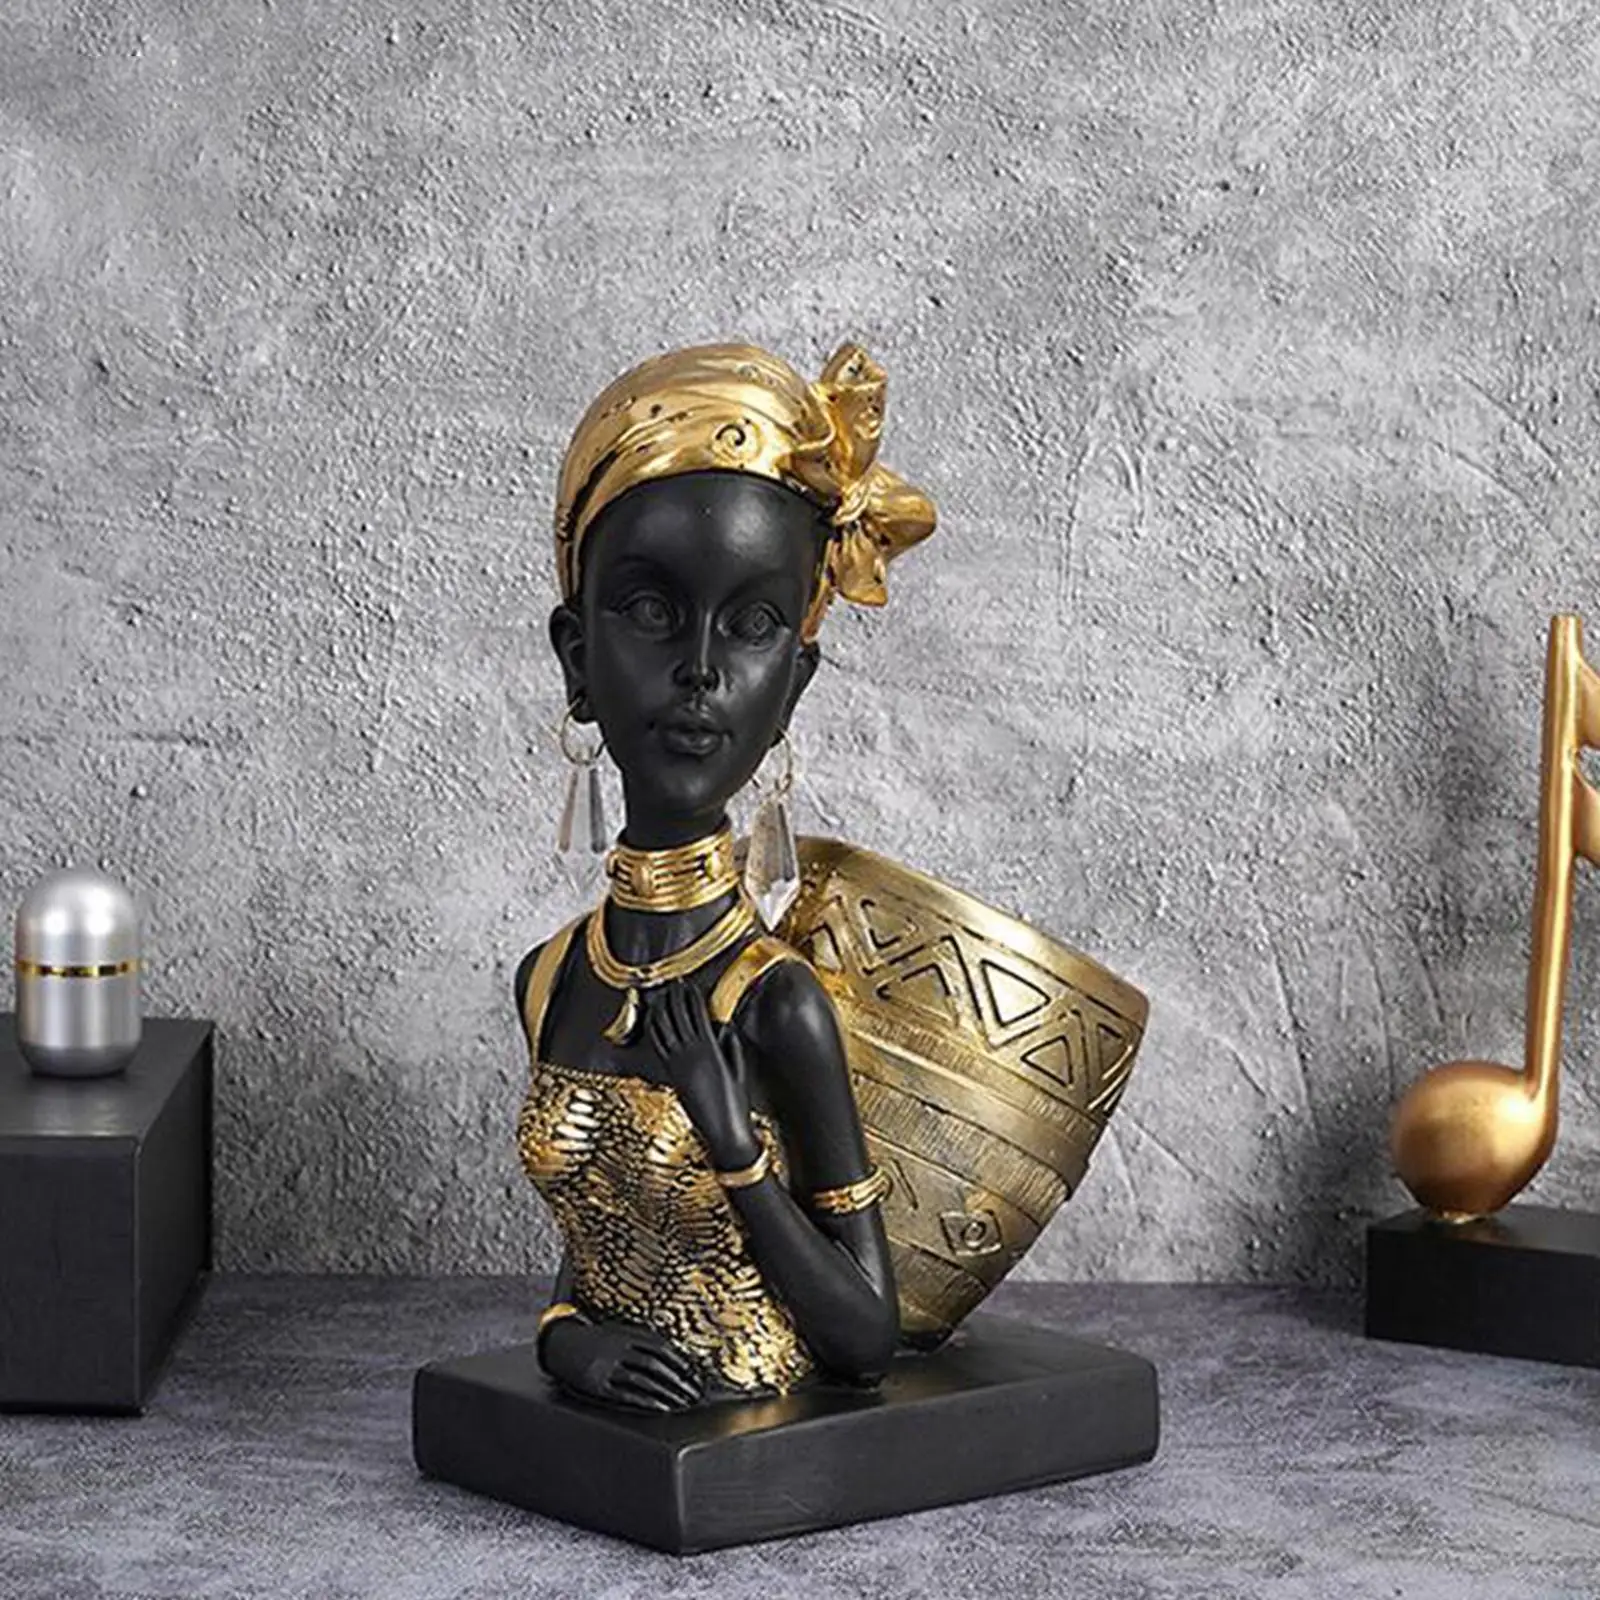 Tribal Lady Statue Sculpture African Table Centerpieces Resin Modern Decor Craft Ornament for Tabletop Office Bedroom Table Desk